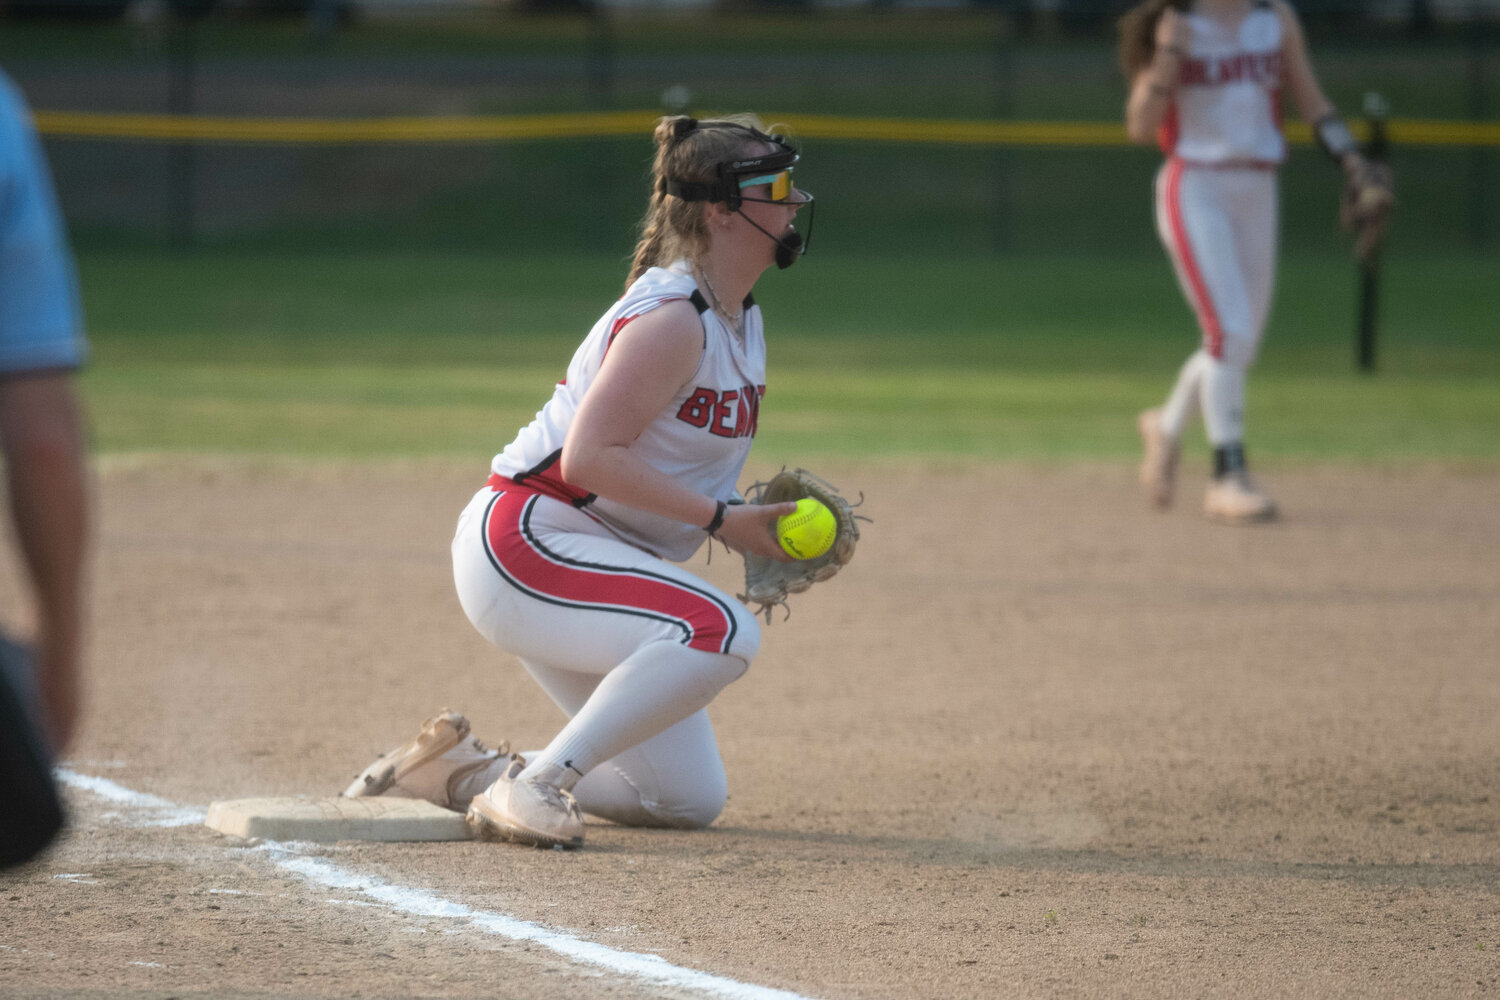 Sophia Hussey checks on a runner during Tenino's 11-1 loss to Seton Catholic in a loser-out game at the 1A Distrct 4 tournament, May 17 at Fort Borst Park.